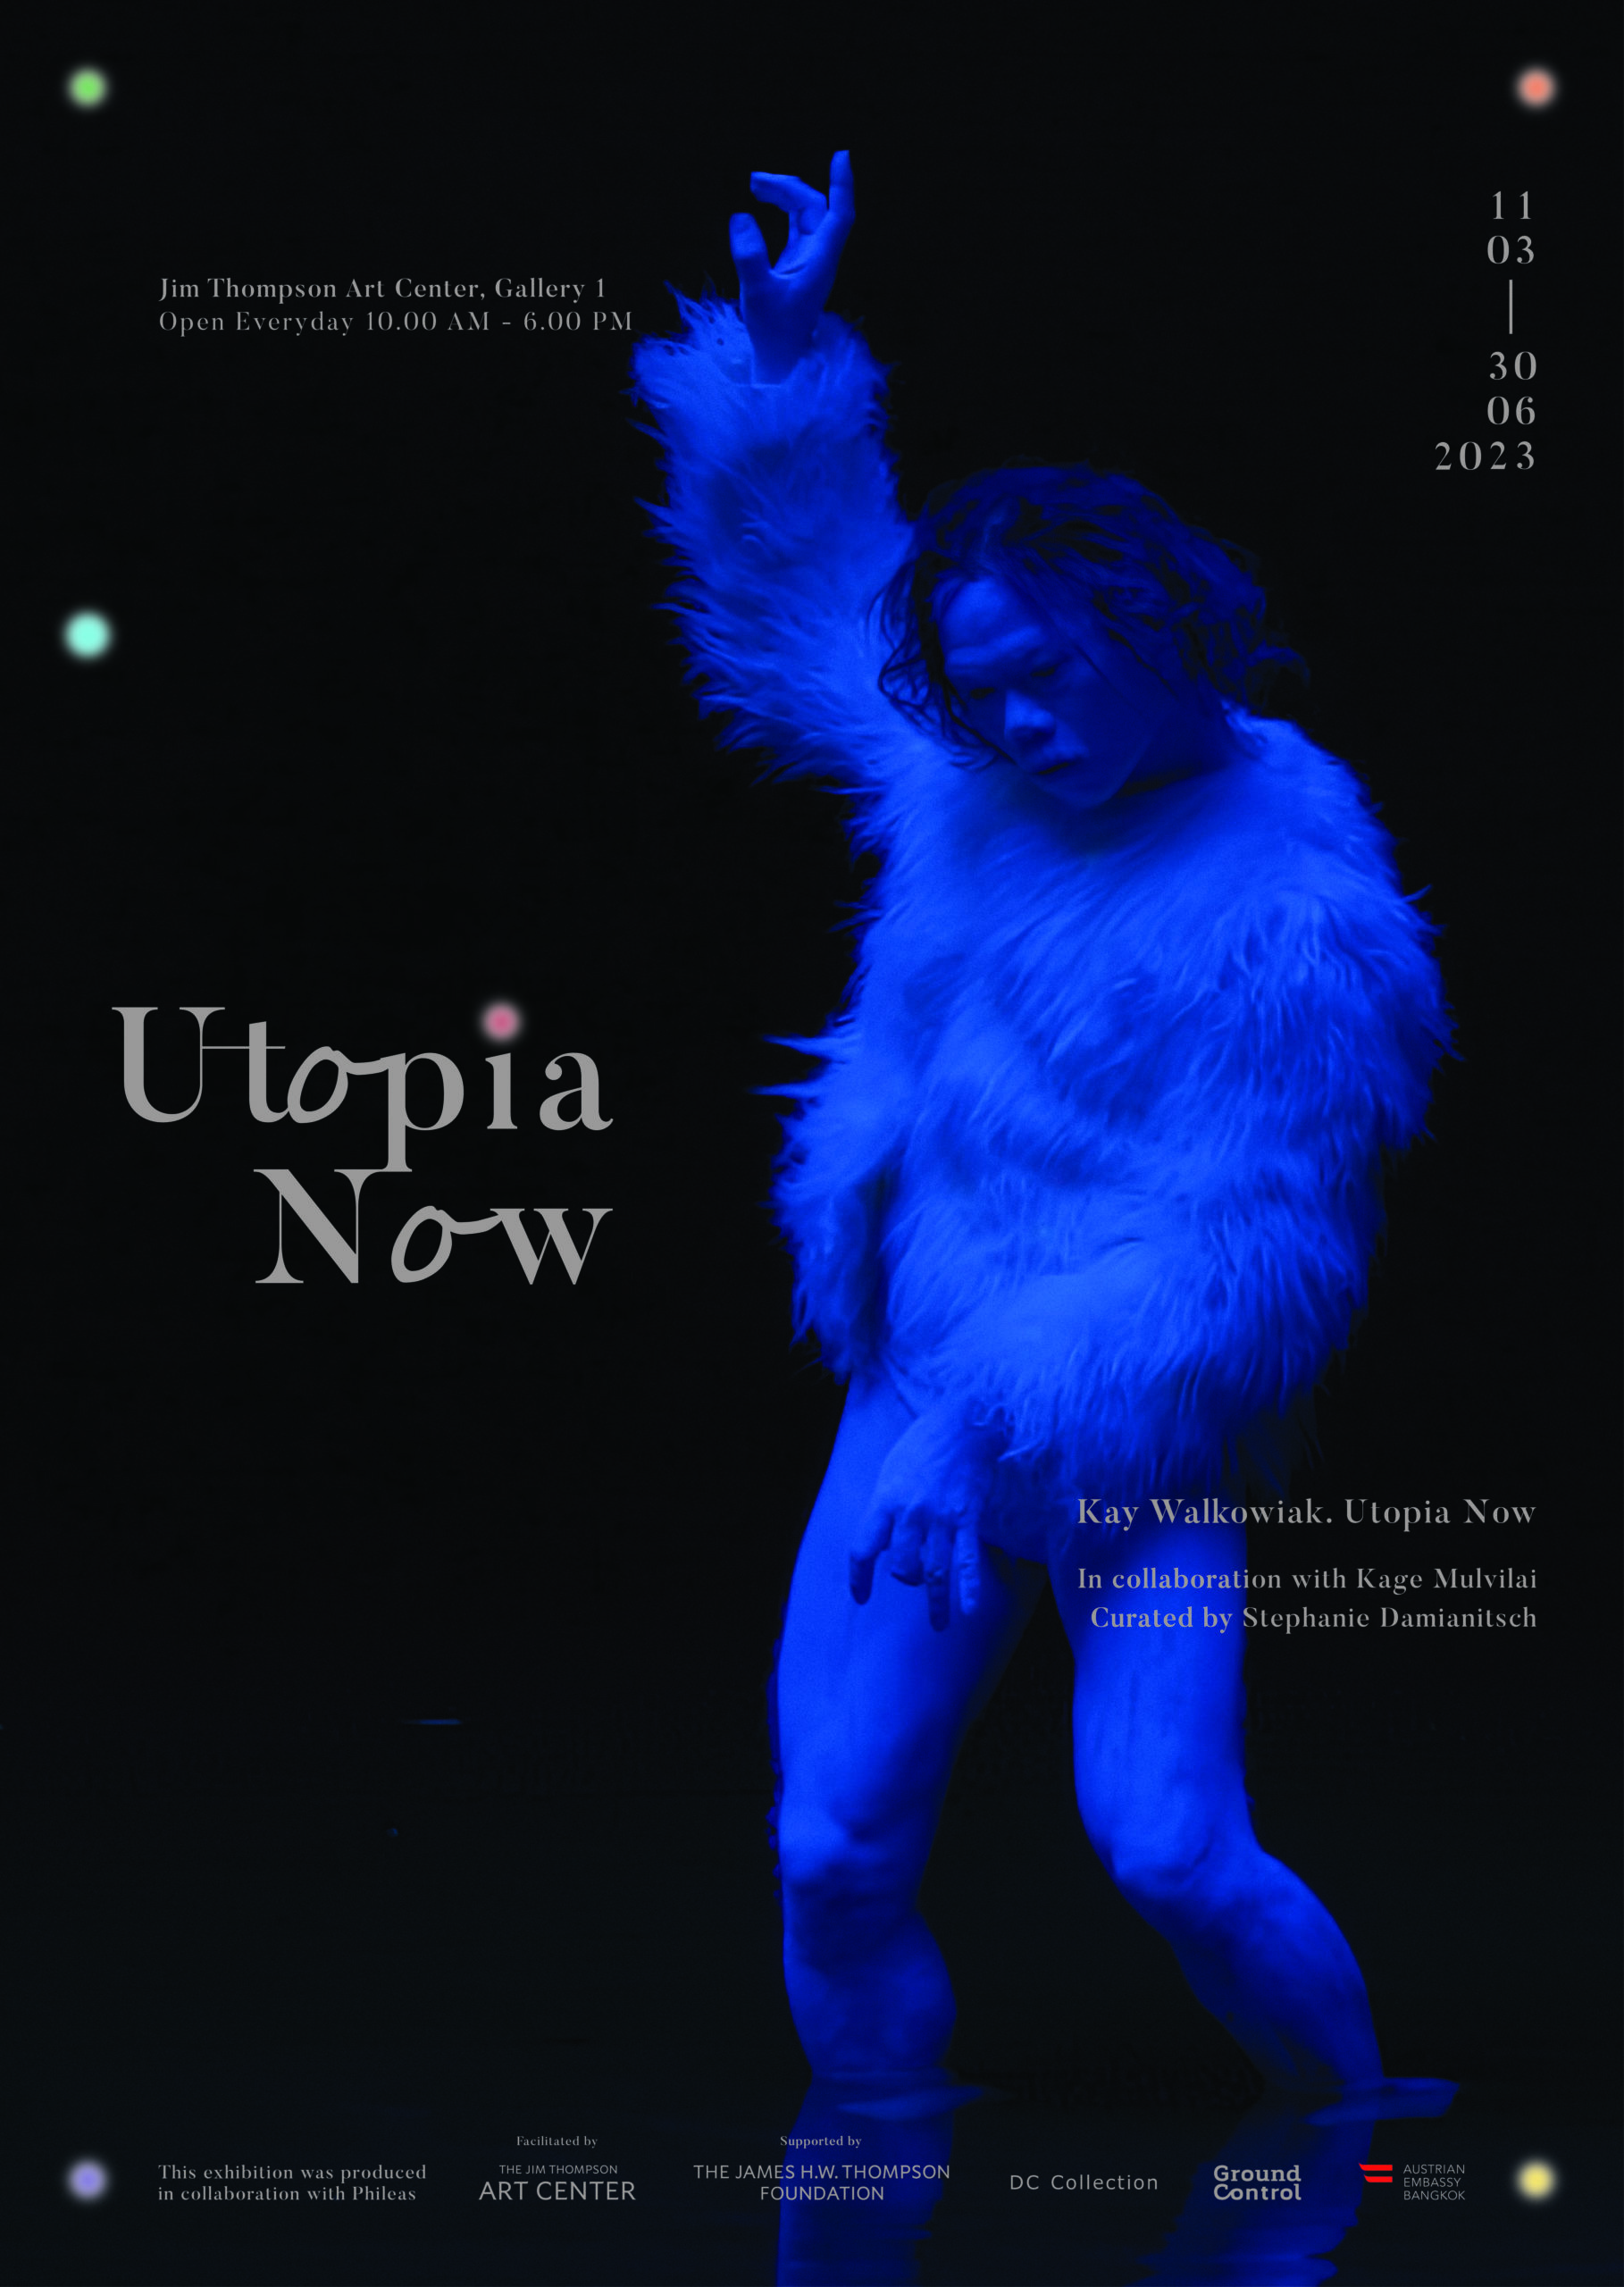 Utopia Now – Exhibition poster – Jim Thompson Art Center. Image provided by Arnaud Lebecq